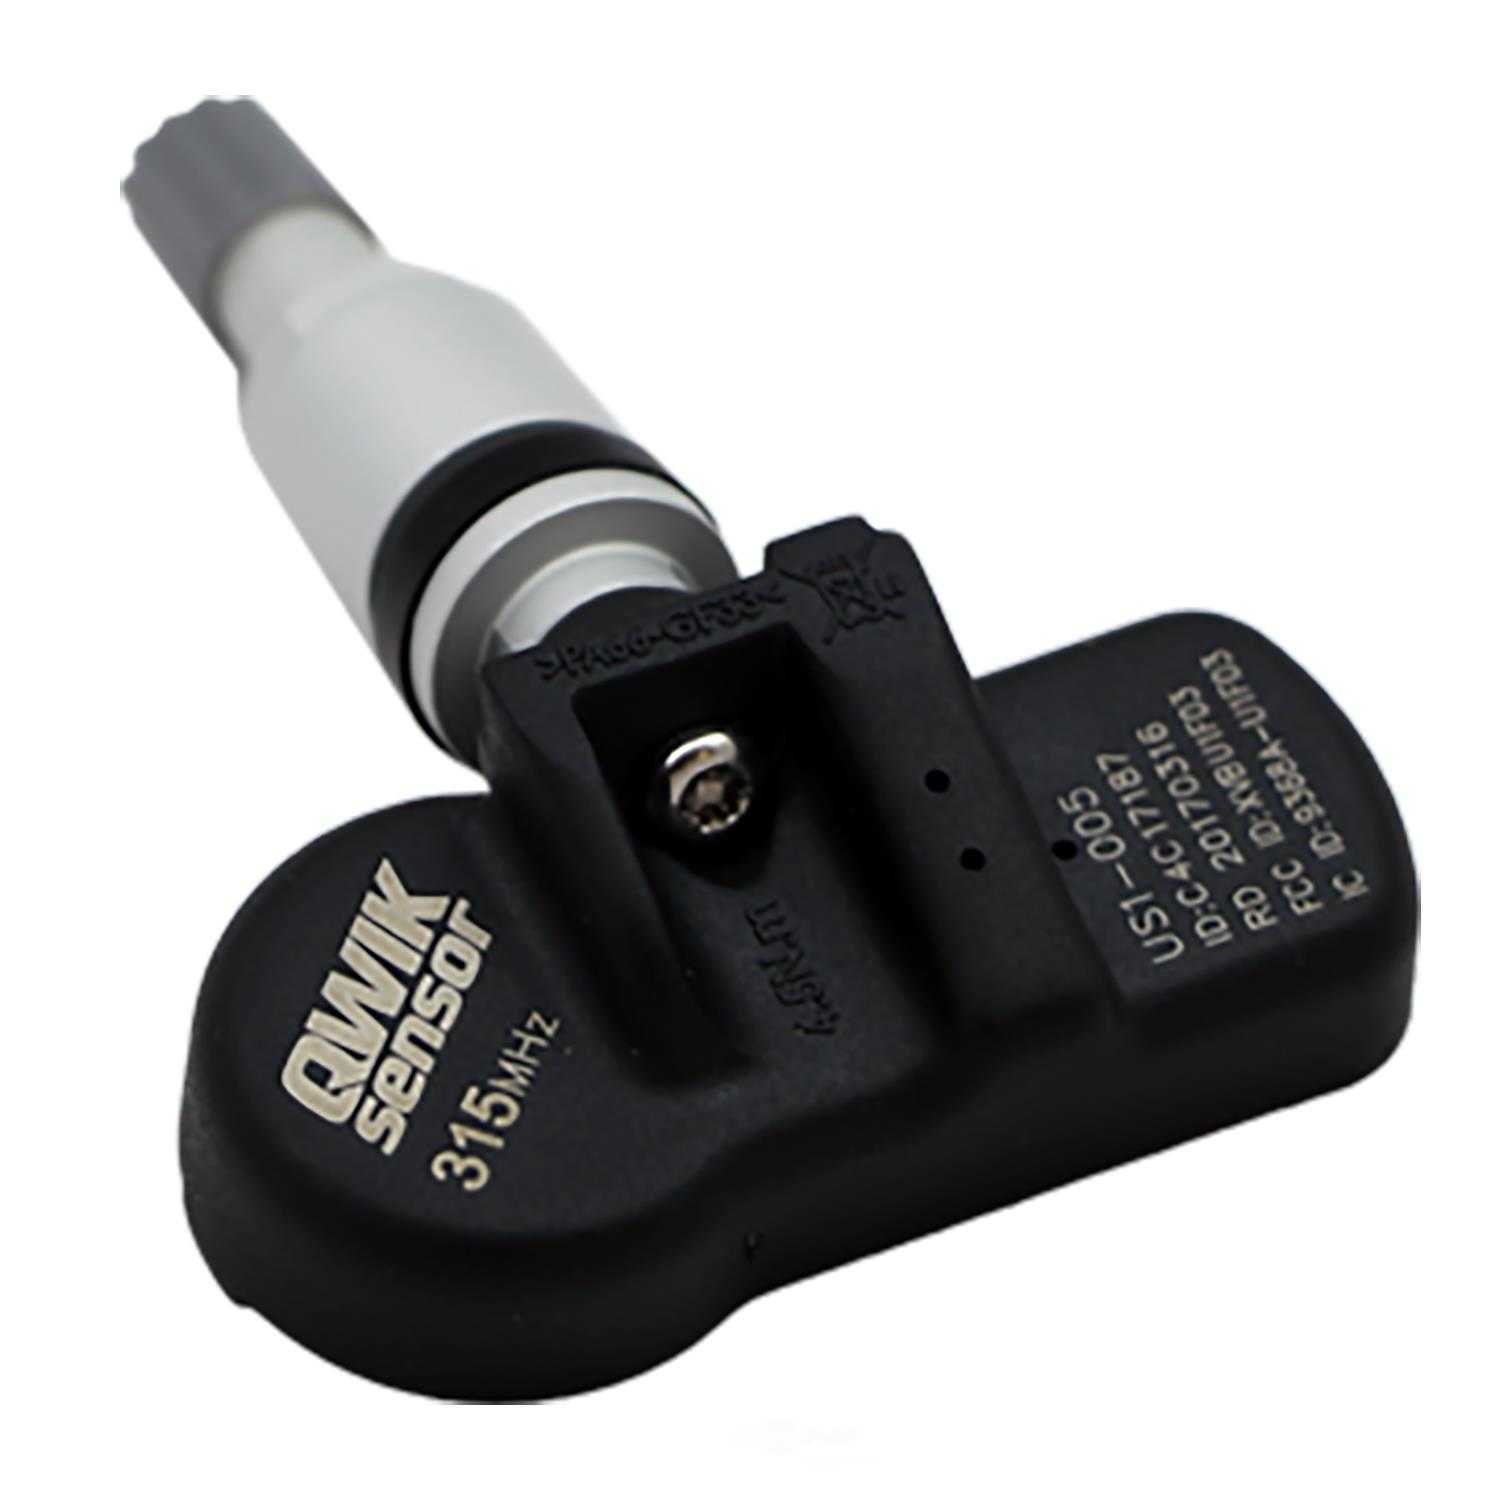 STANDARD MOTOR PRODUCTS - Tire Pressure Monitoring System Programmable Sensor - STA QS105M